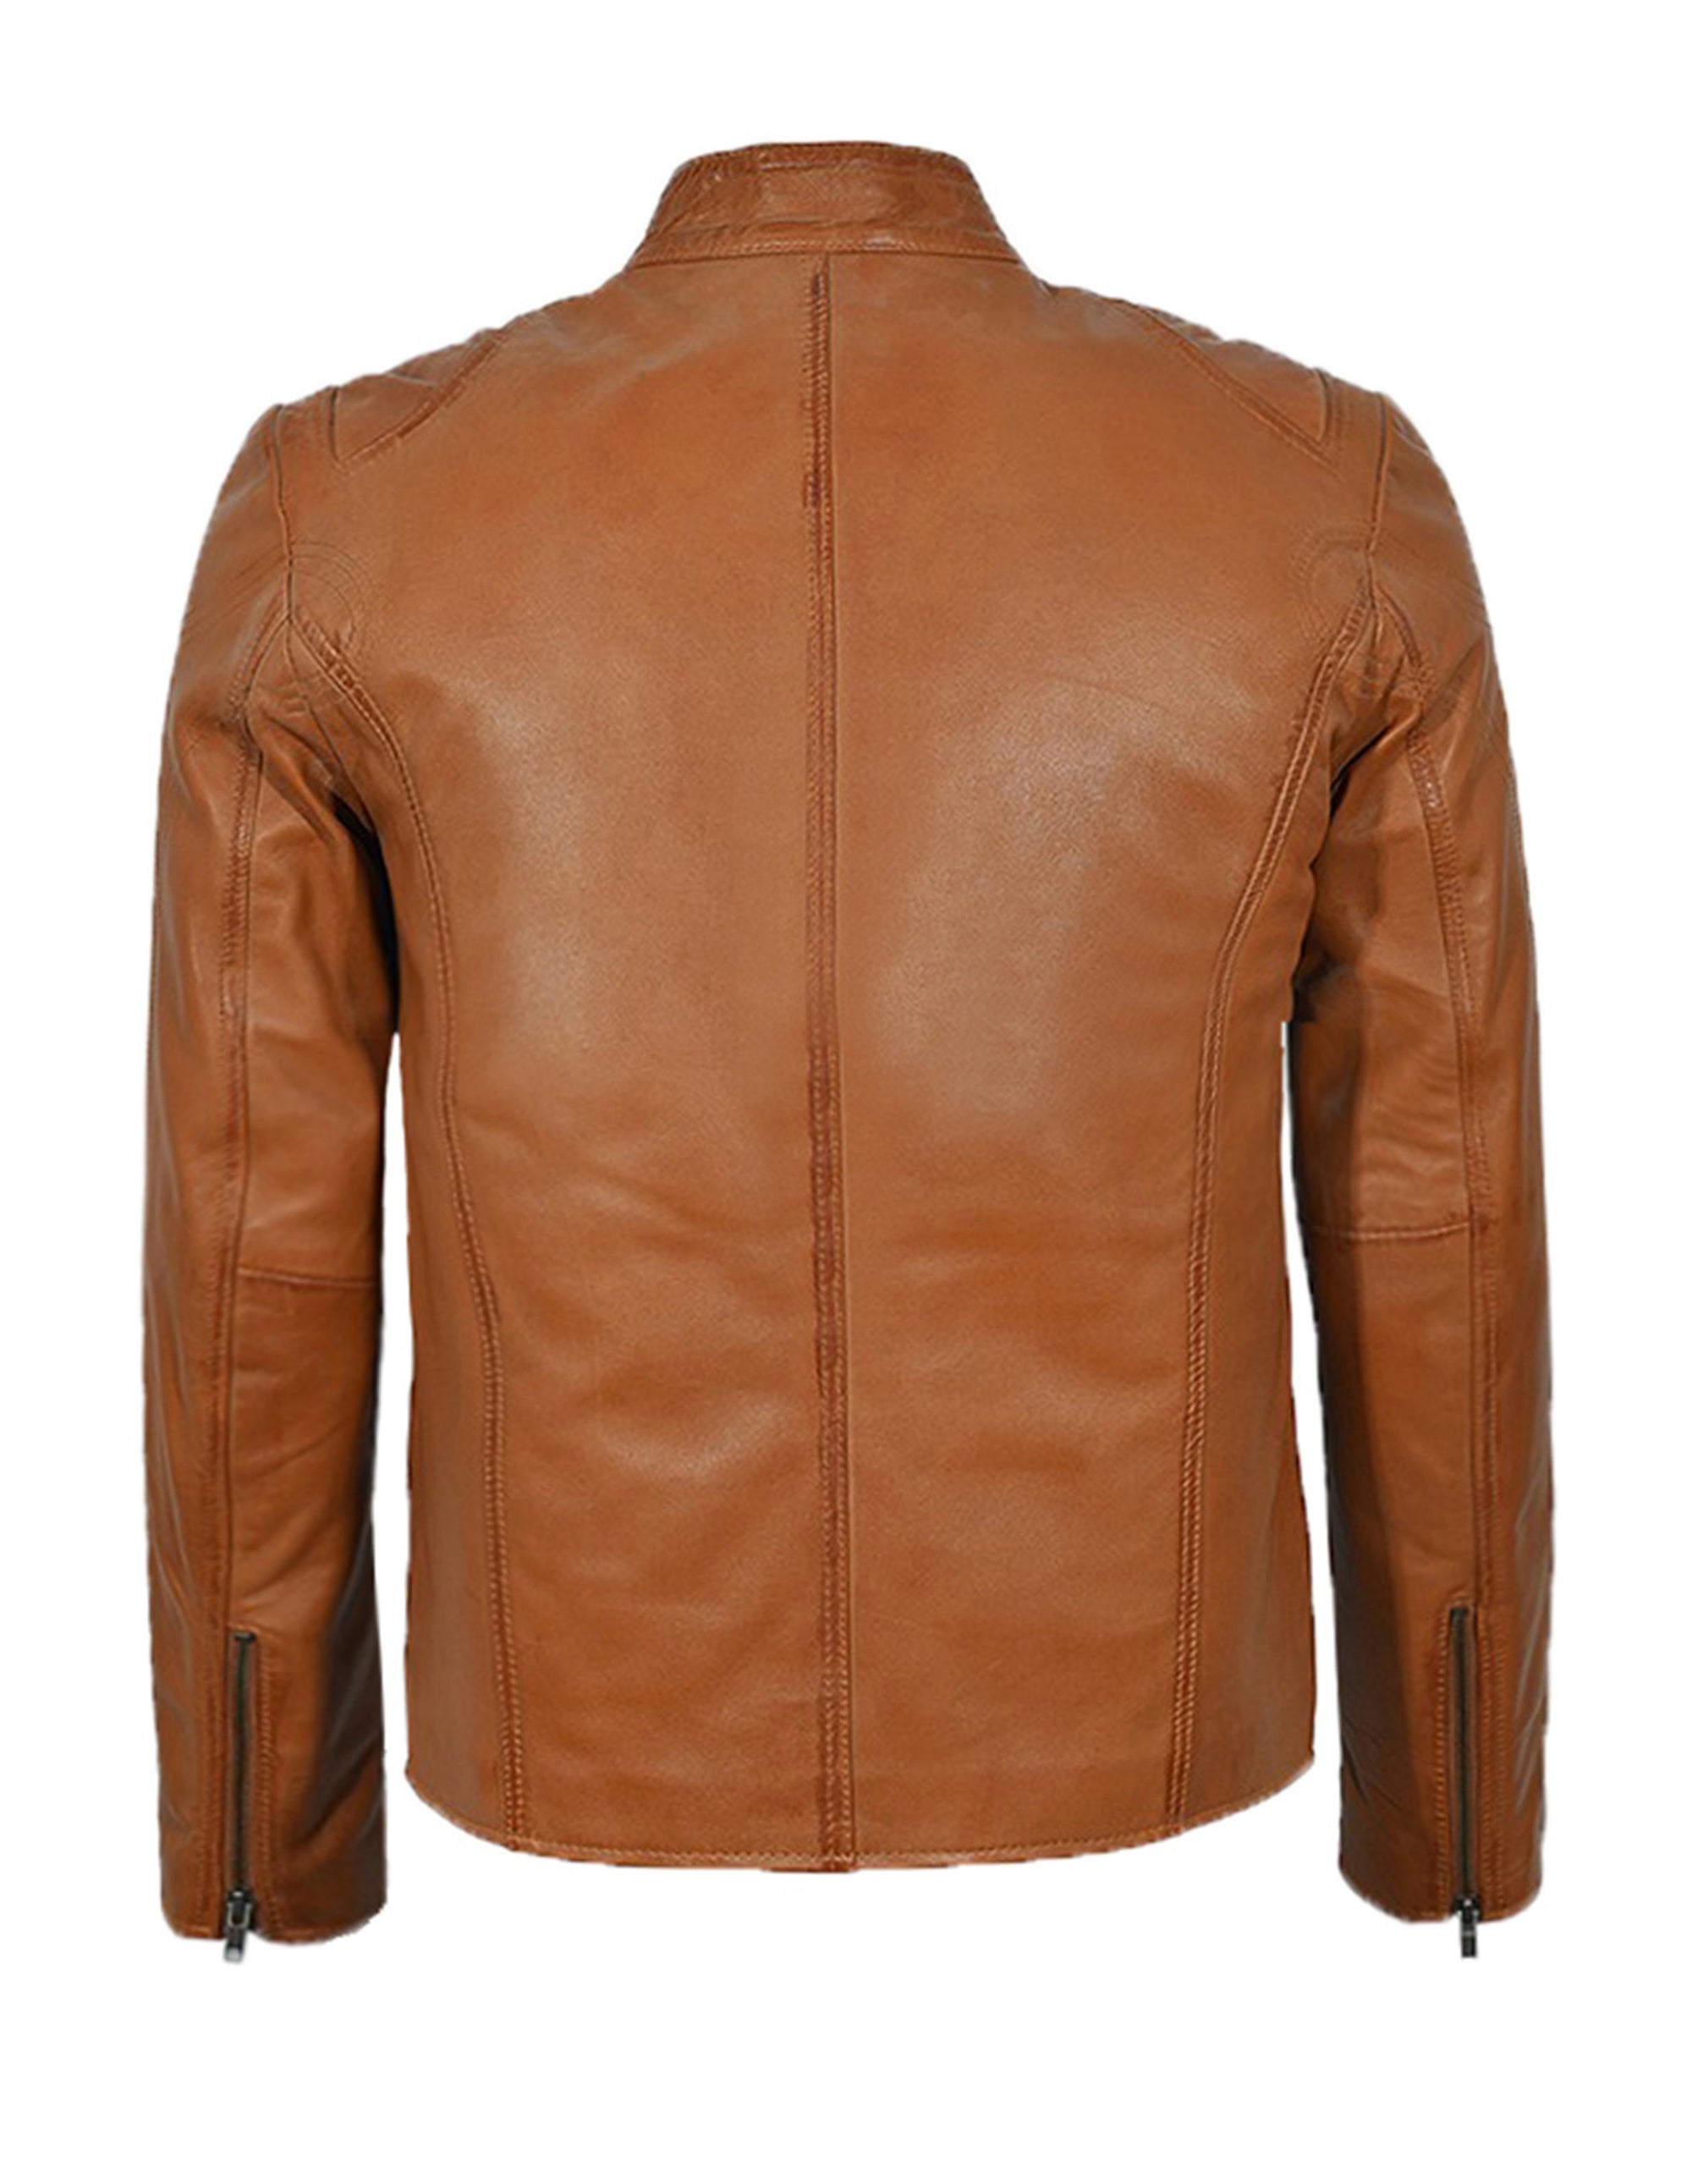 Tan Leather Motorcycle Jacket For Men